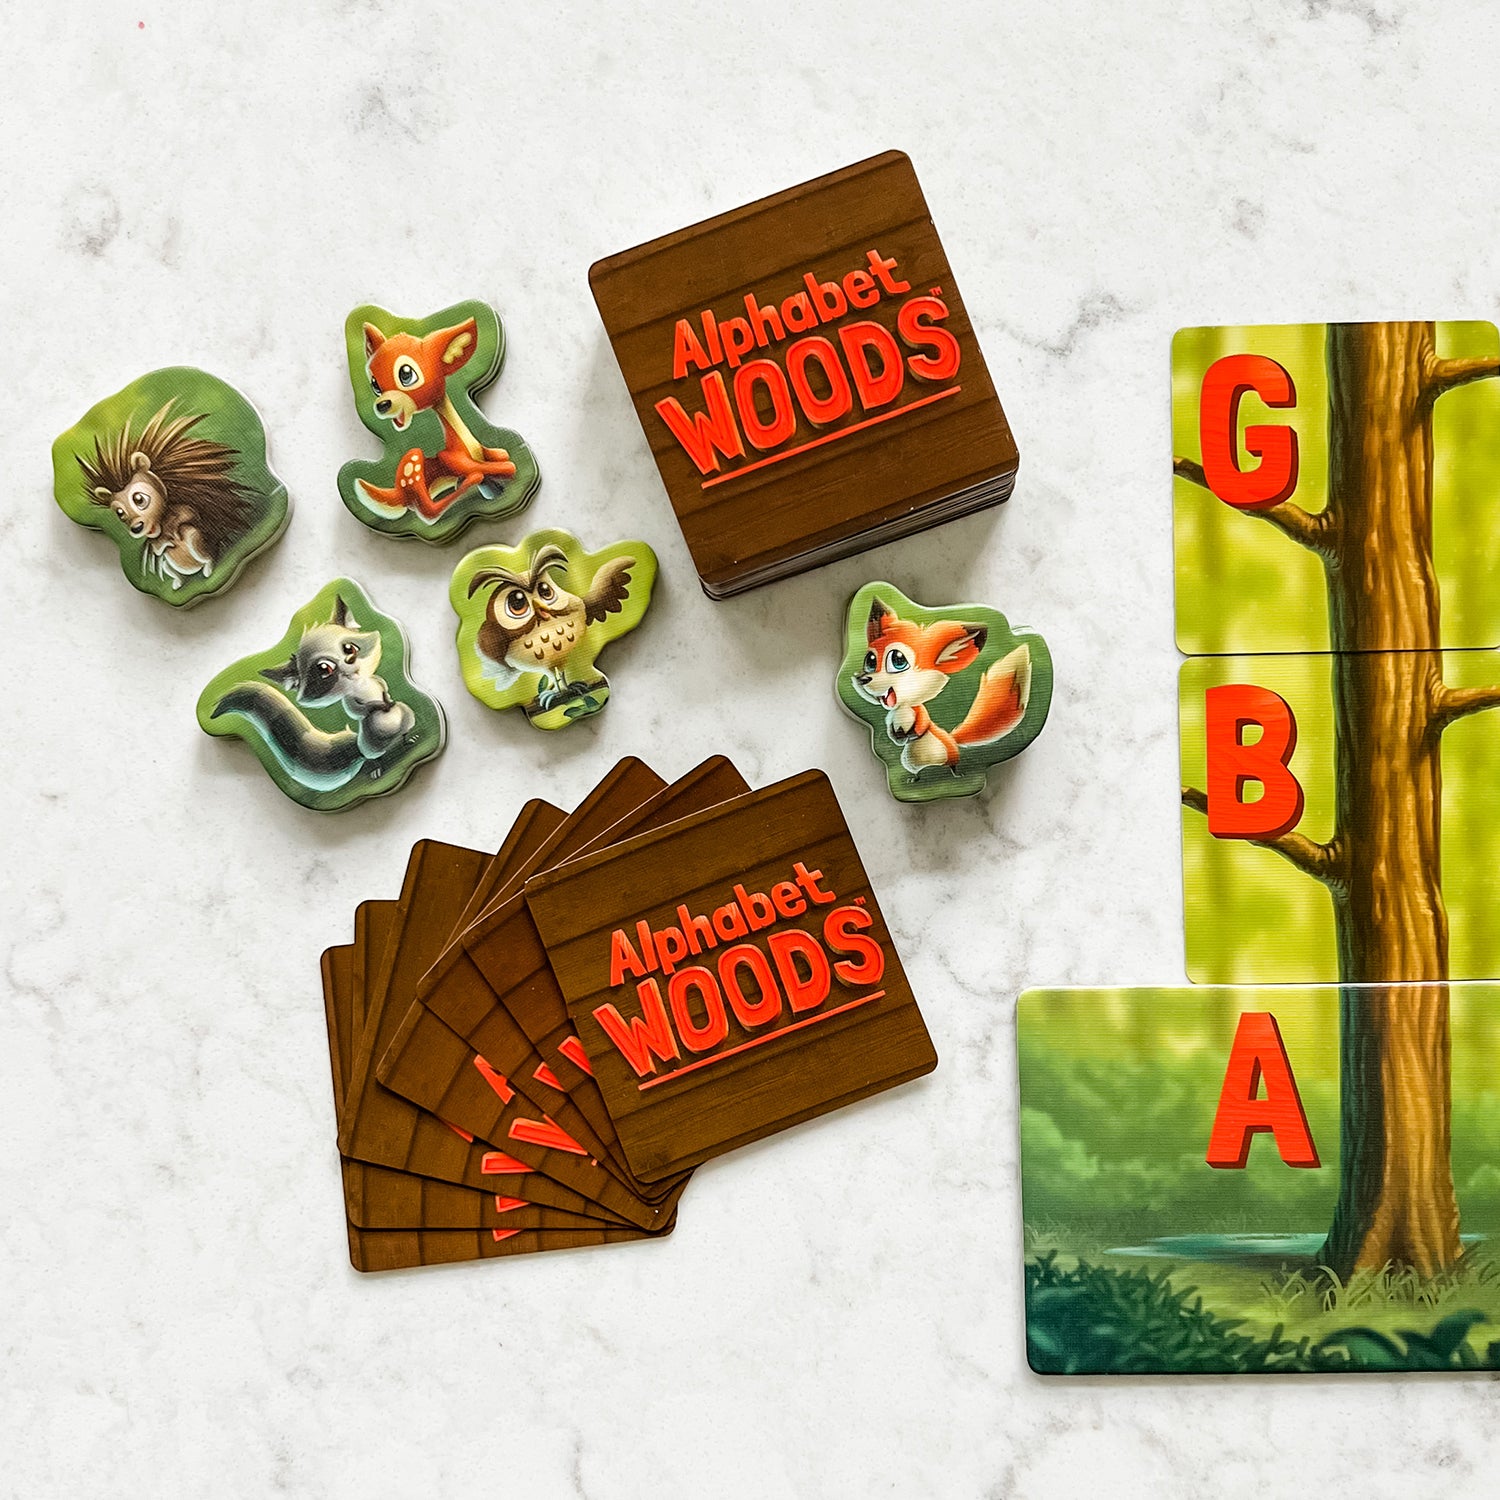 Alphabet Woods educational board game by SimplyFun for kids aged 5 and up